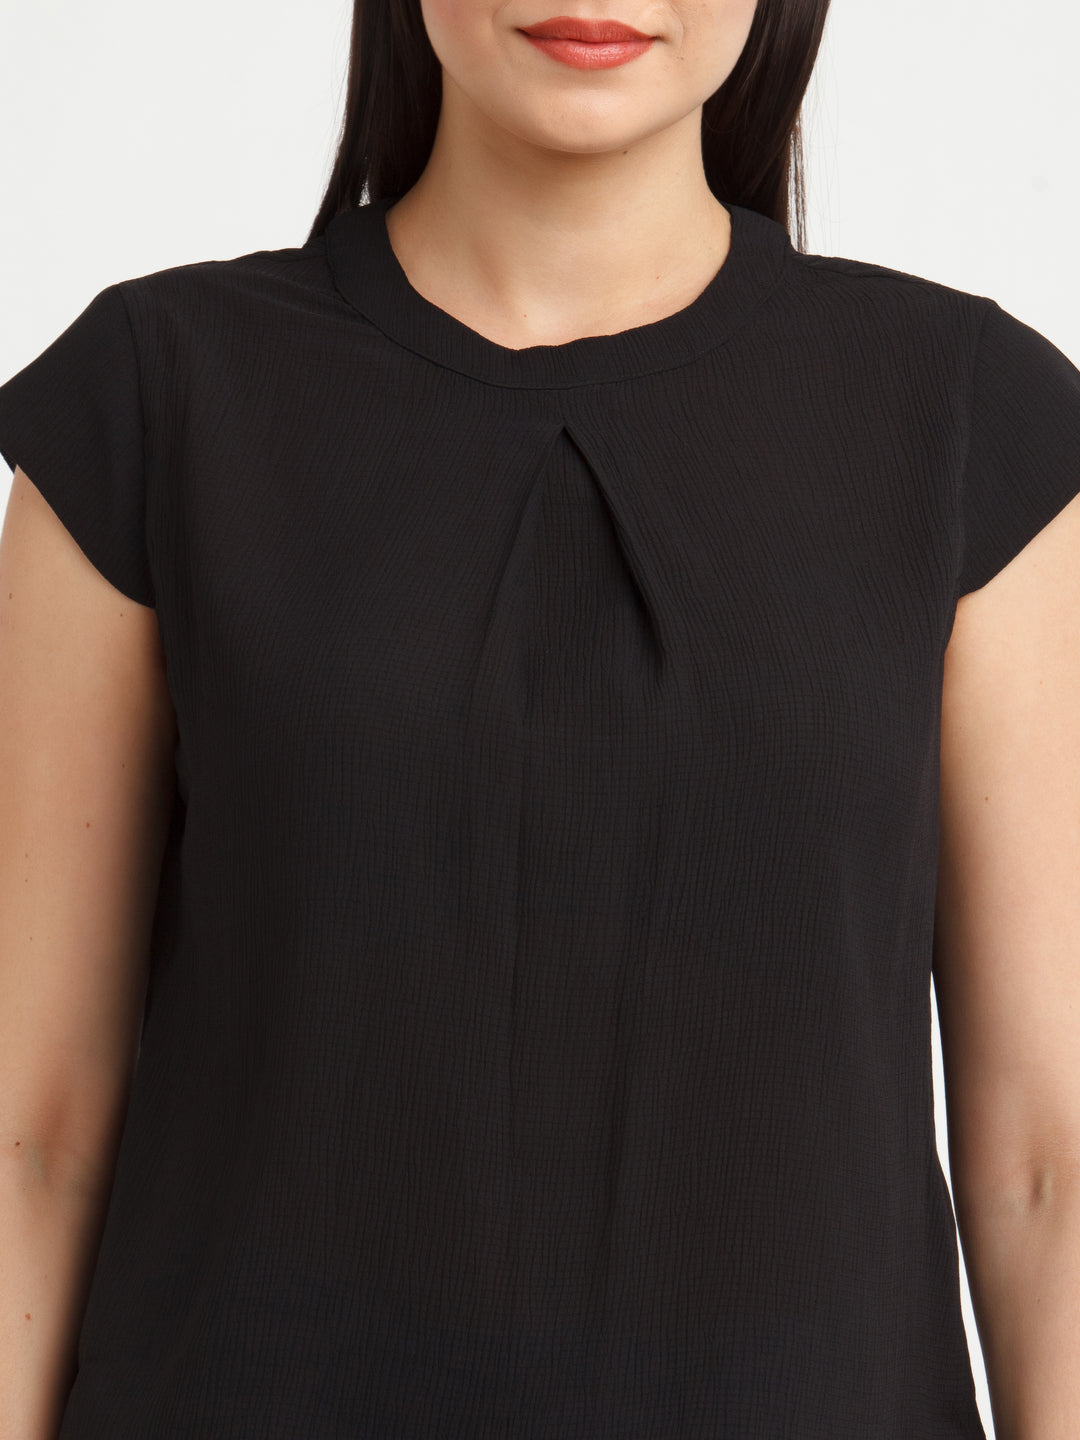 Black Solid Top For Women